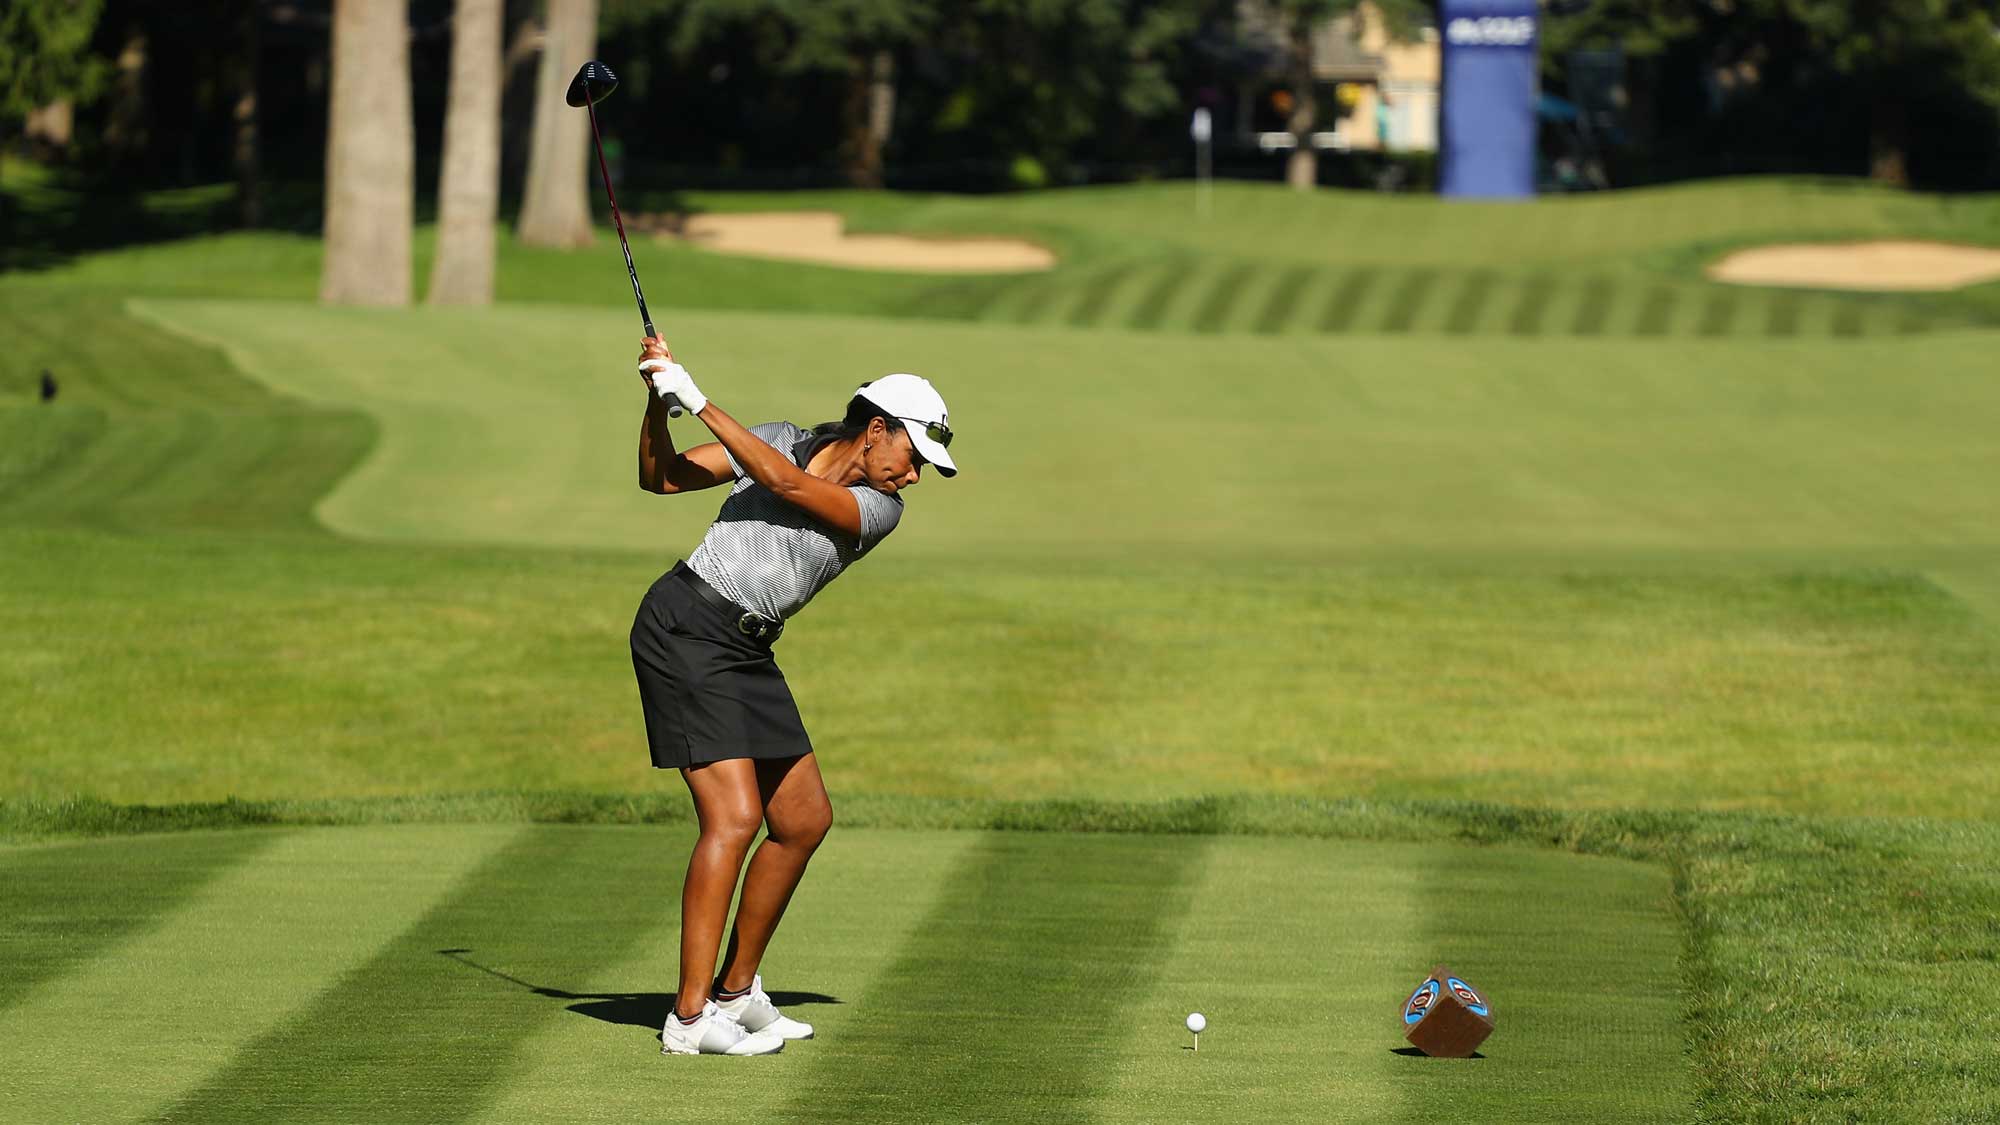 Former Secretary of State Condoleezza Rice in action during the pro-am prior to the start of the KPMG Women's PGA Championship